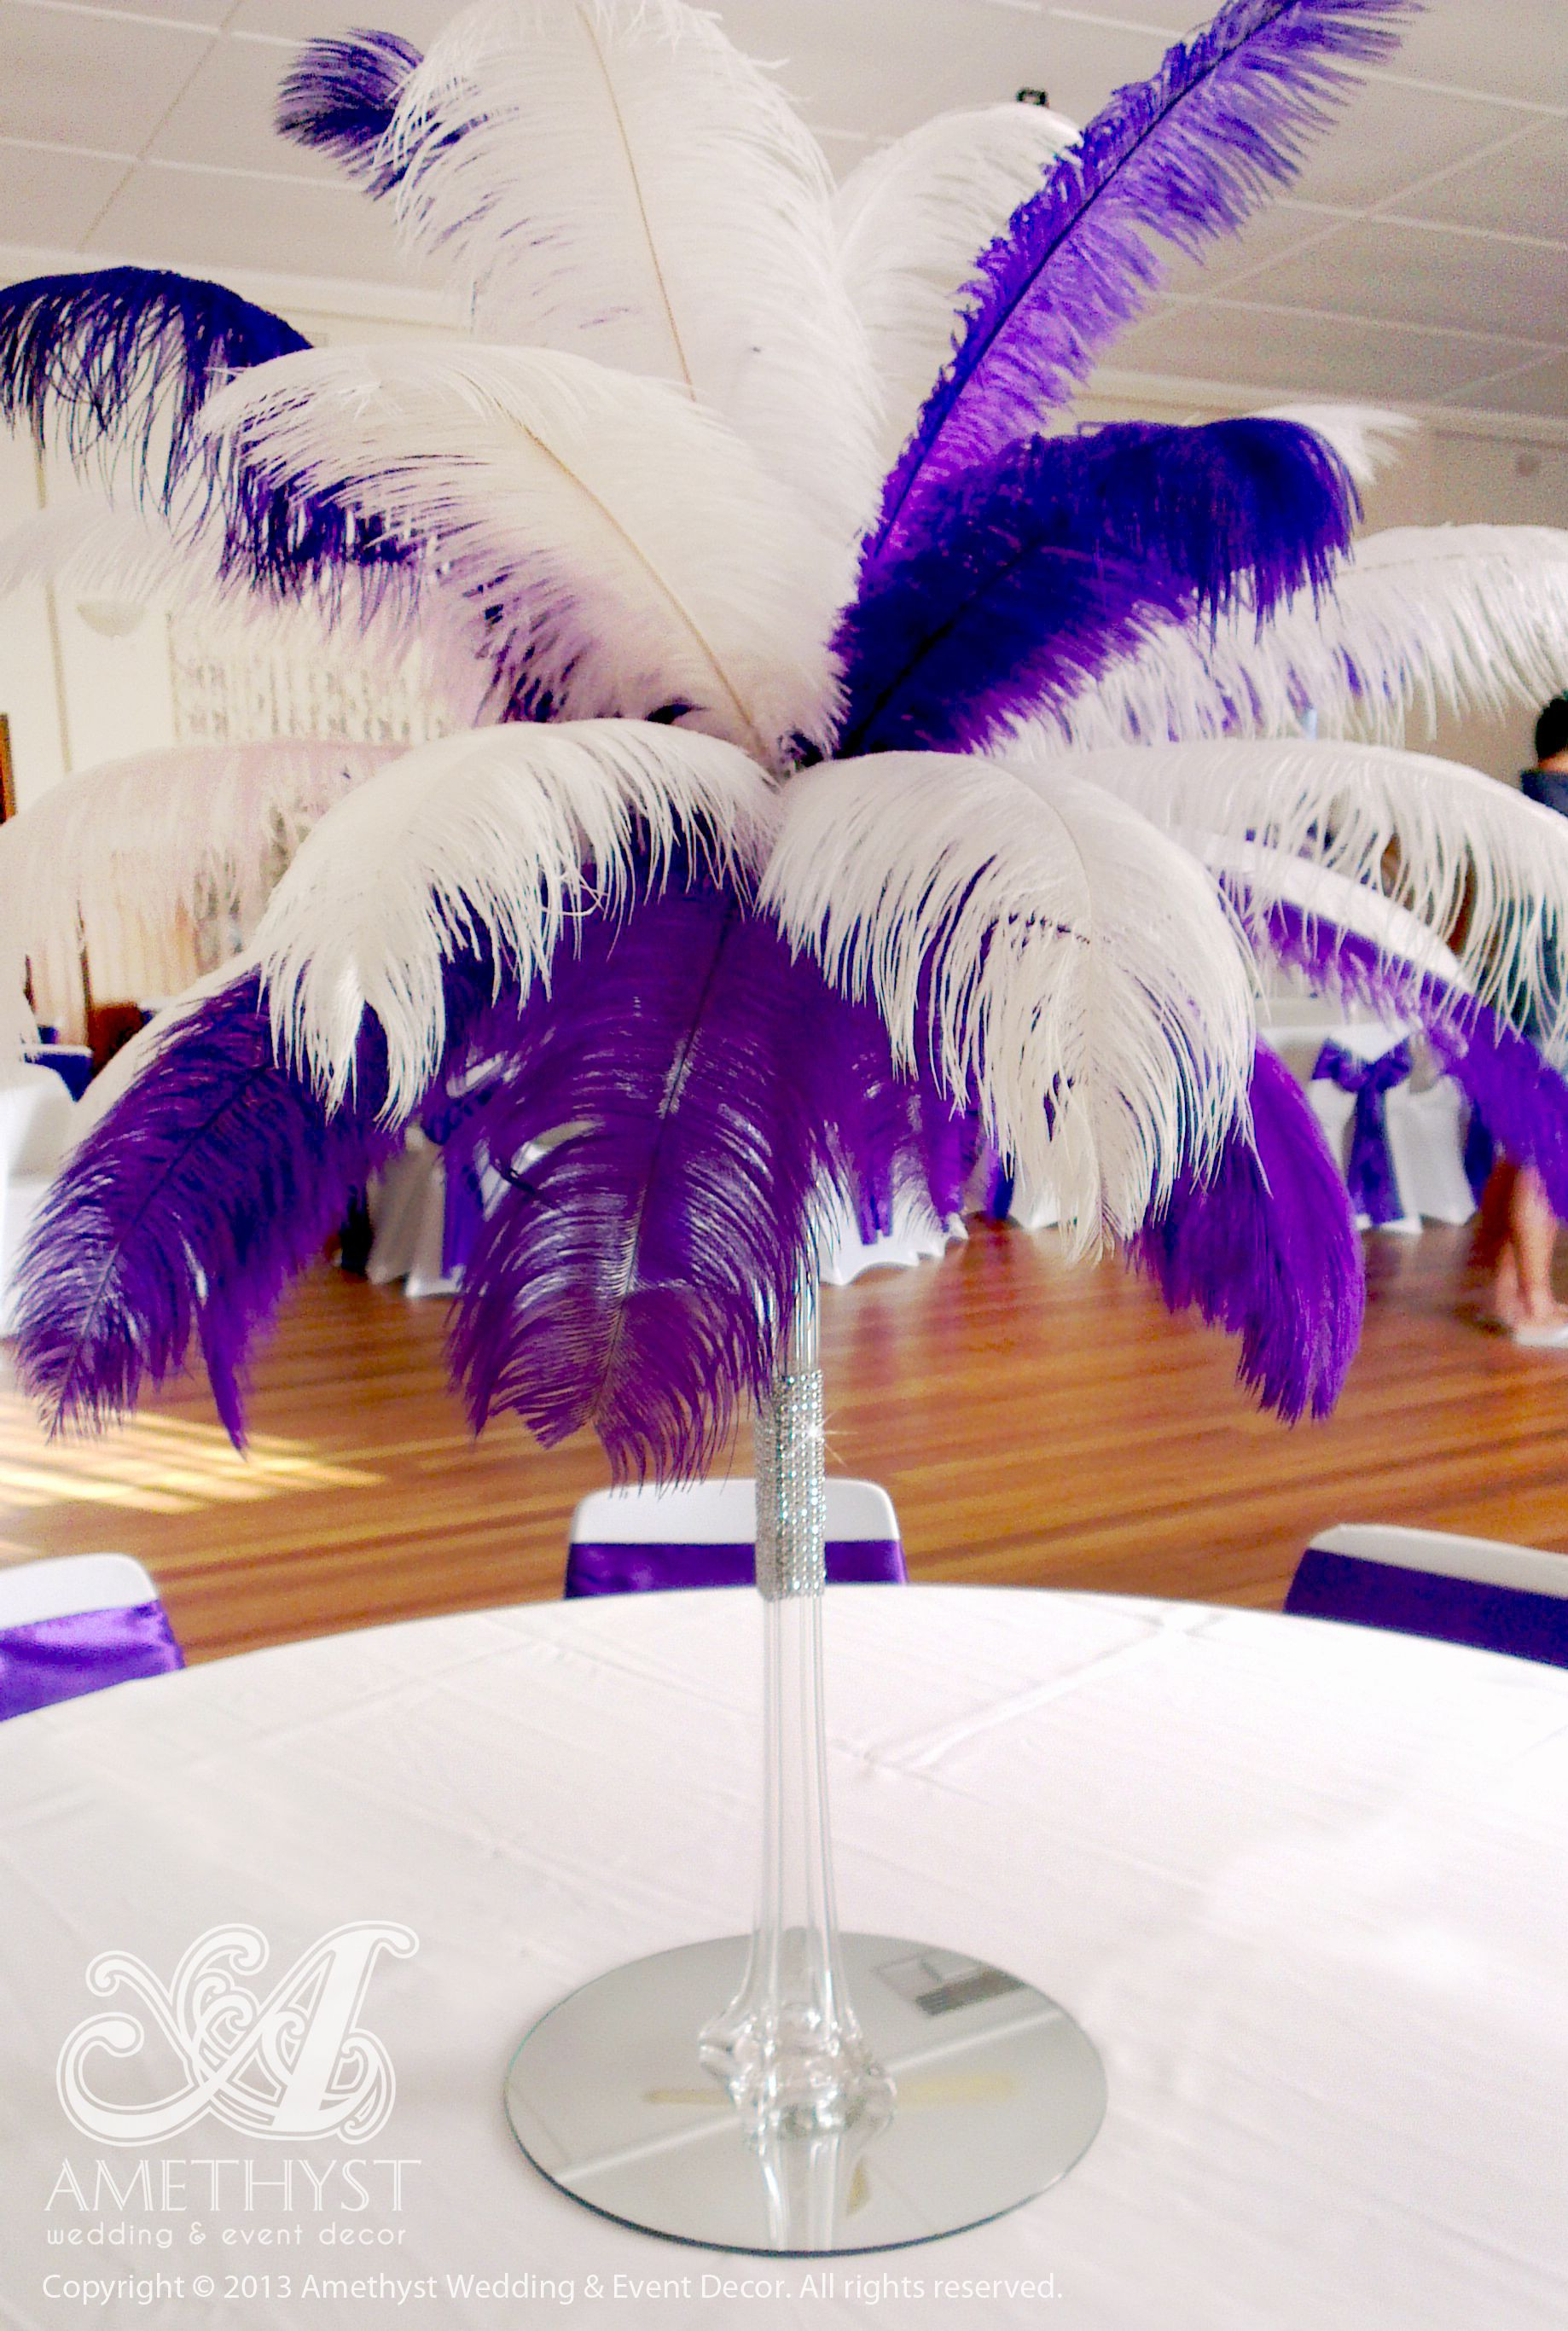 21 Lovely Clear Cube Vase 2024 free download clear cube vase of centerpiece package 60cm clear eiffel vase with purple white within centerpiece package 60cm clear eiffel vase with purple white ostrich feathers diamante mesh 30cm mirror